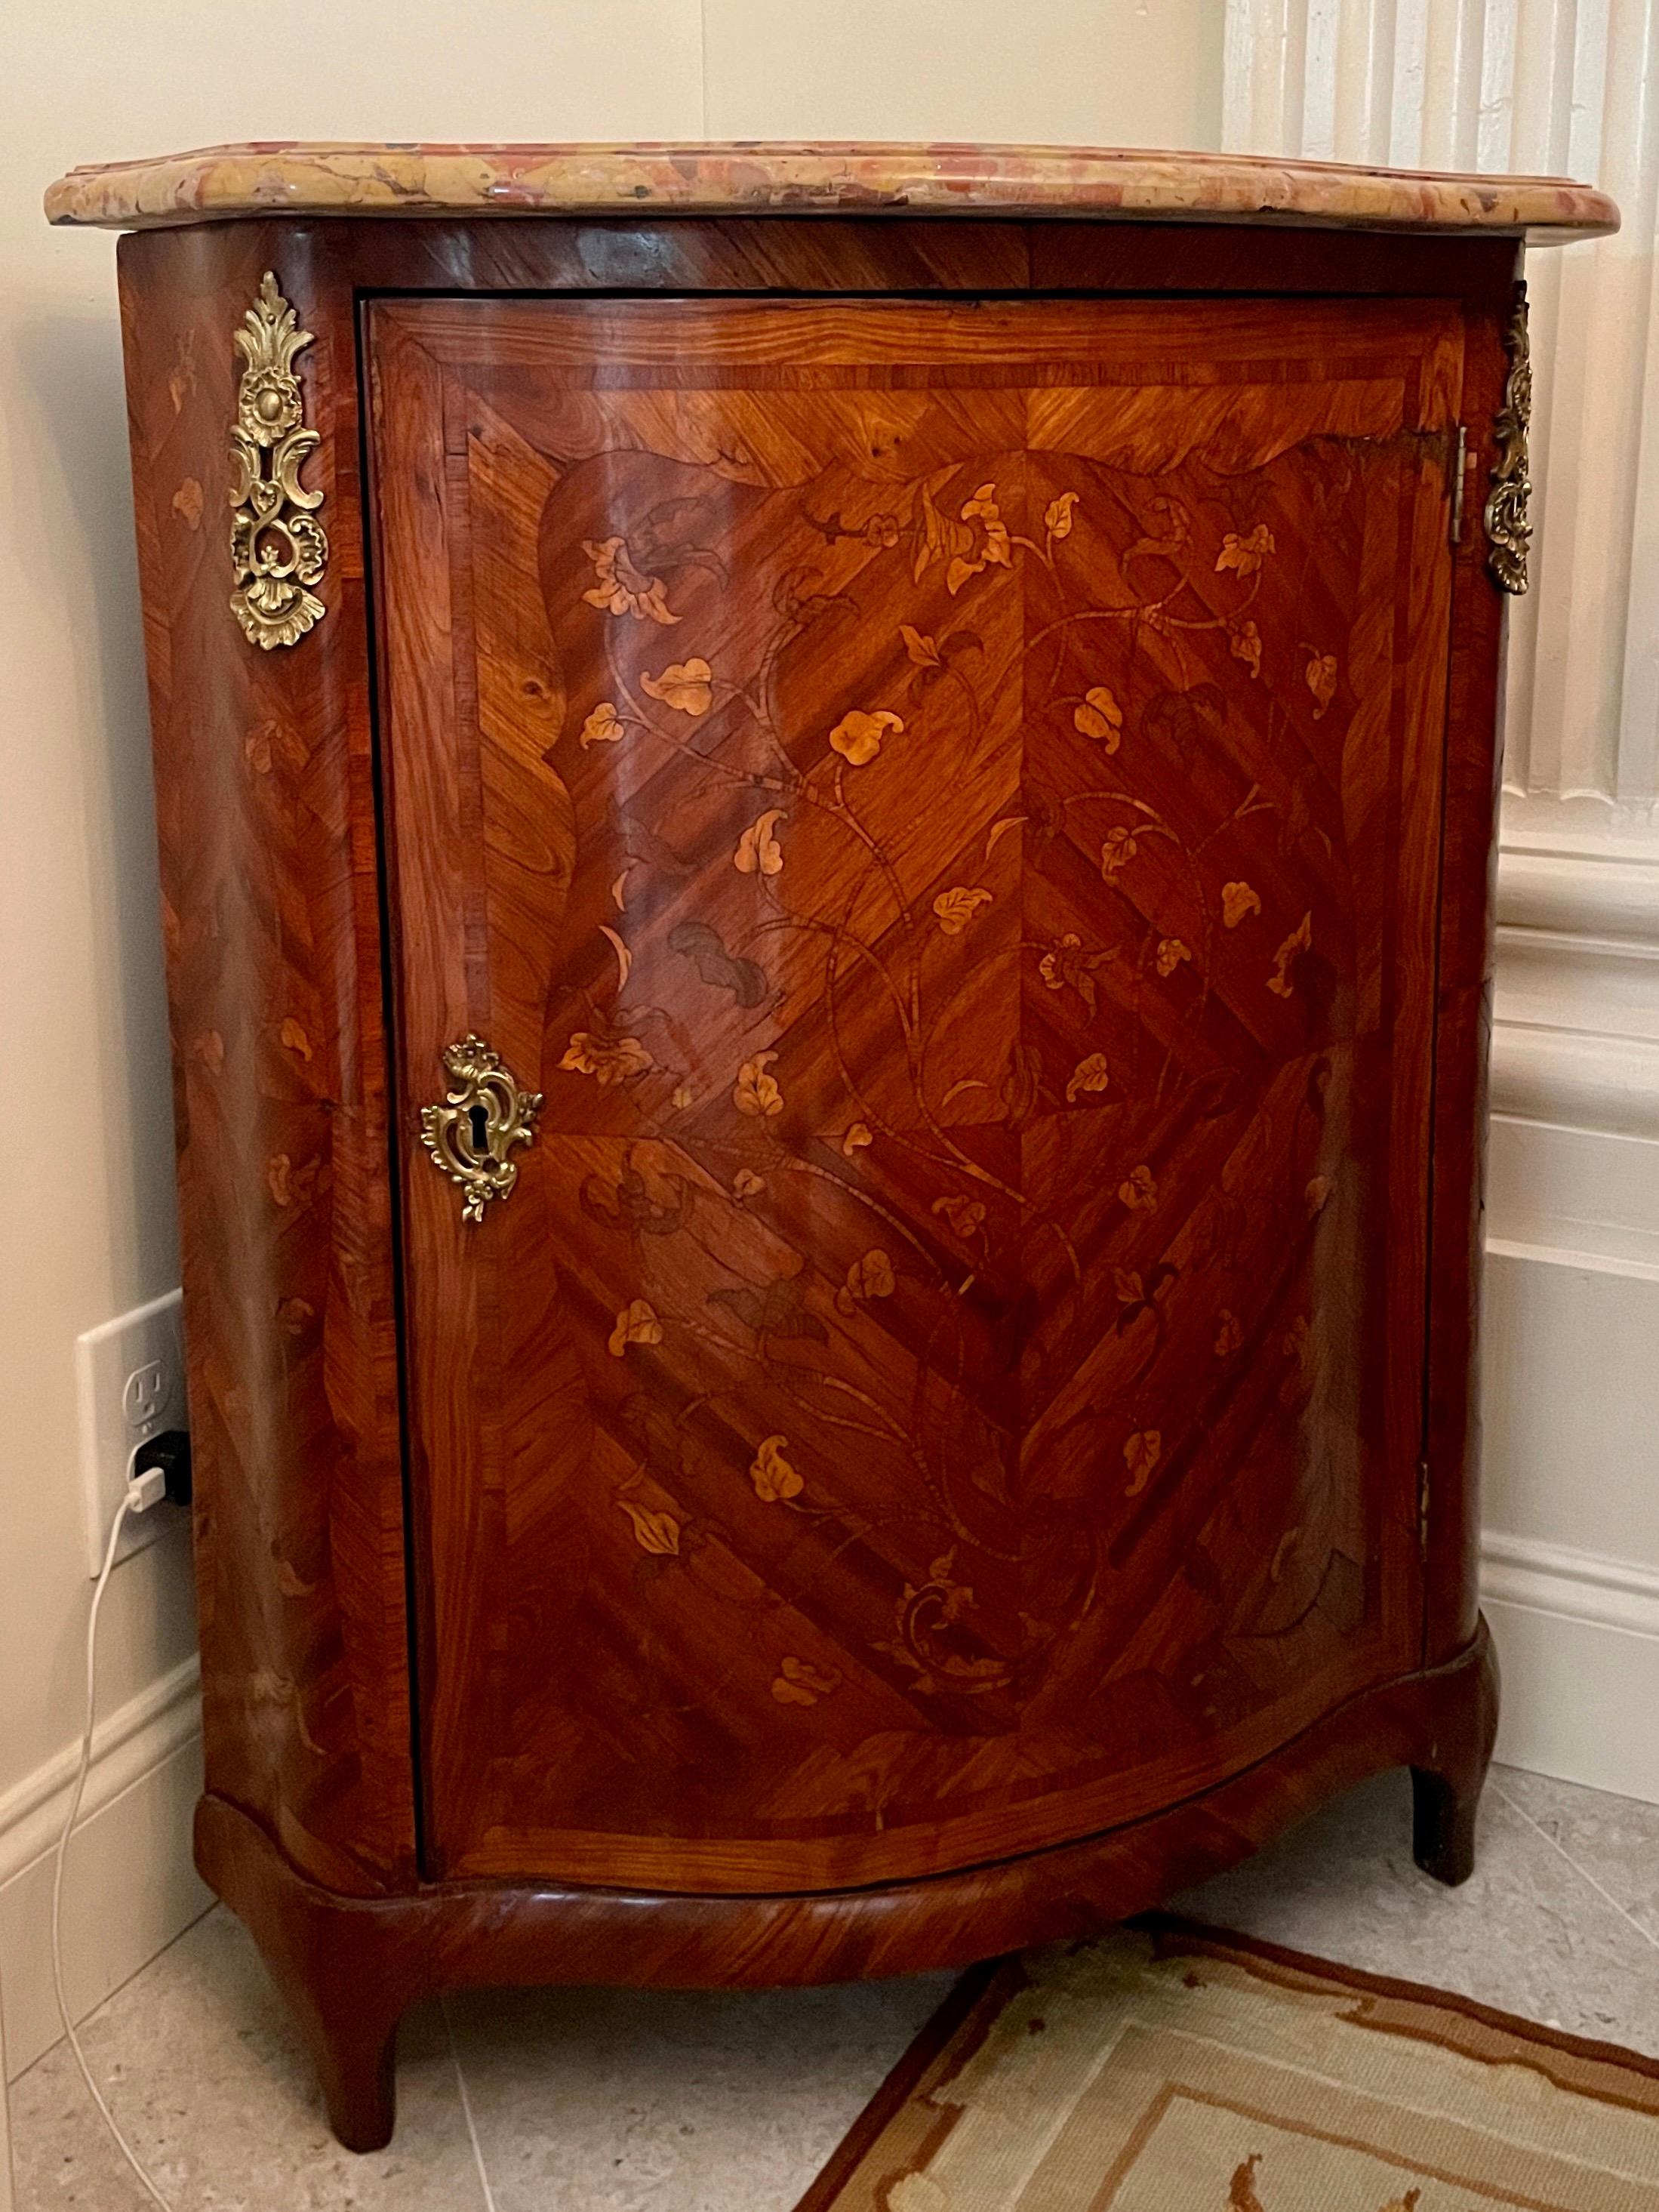 French transition marble top corner cabinet with makers label. Key is not included. Beautiful marquetry work and original marble top.